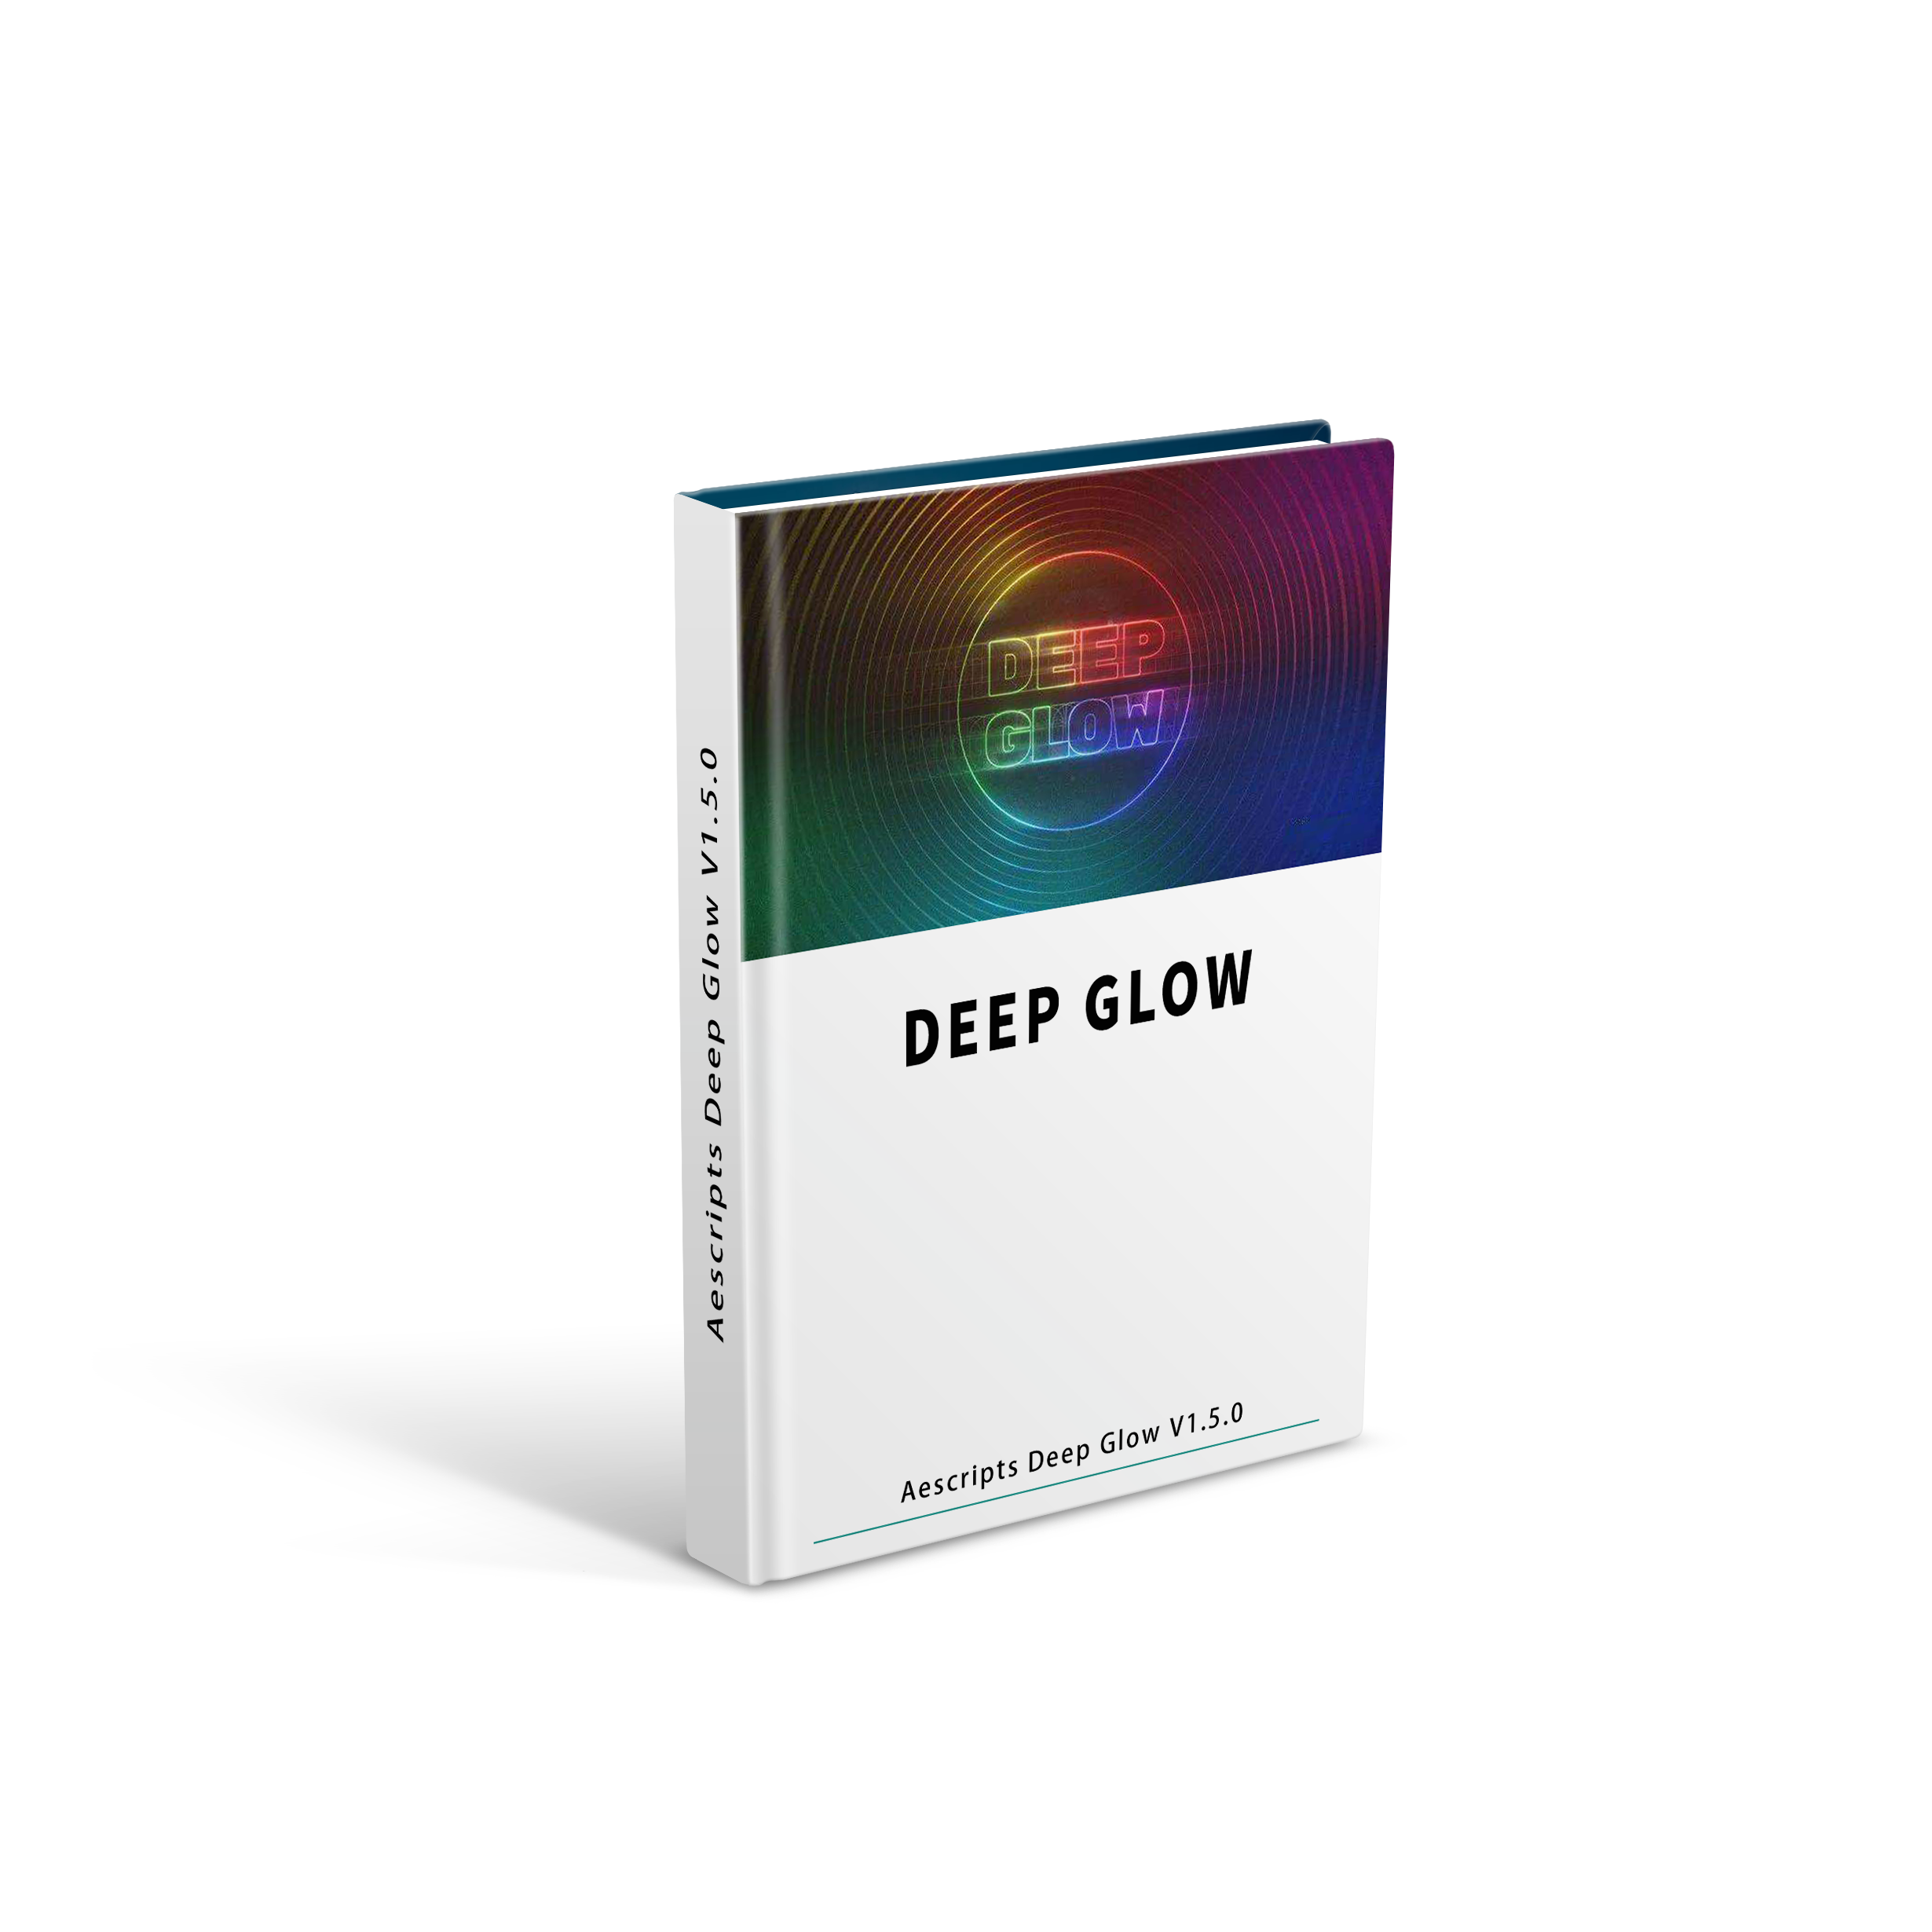 Aescripts Deep Glow V1.5.0 Fro After Effects 2022-CS6 Win/Mac 破解版